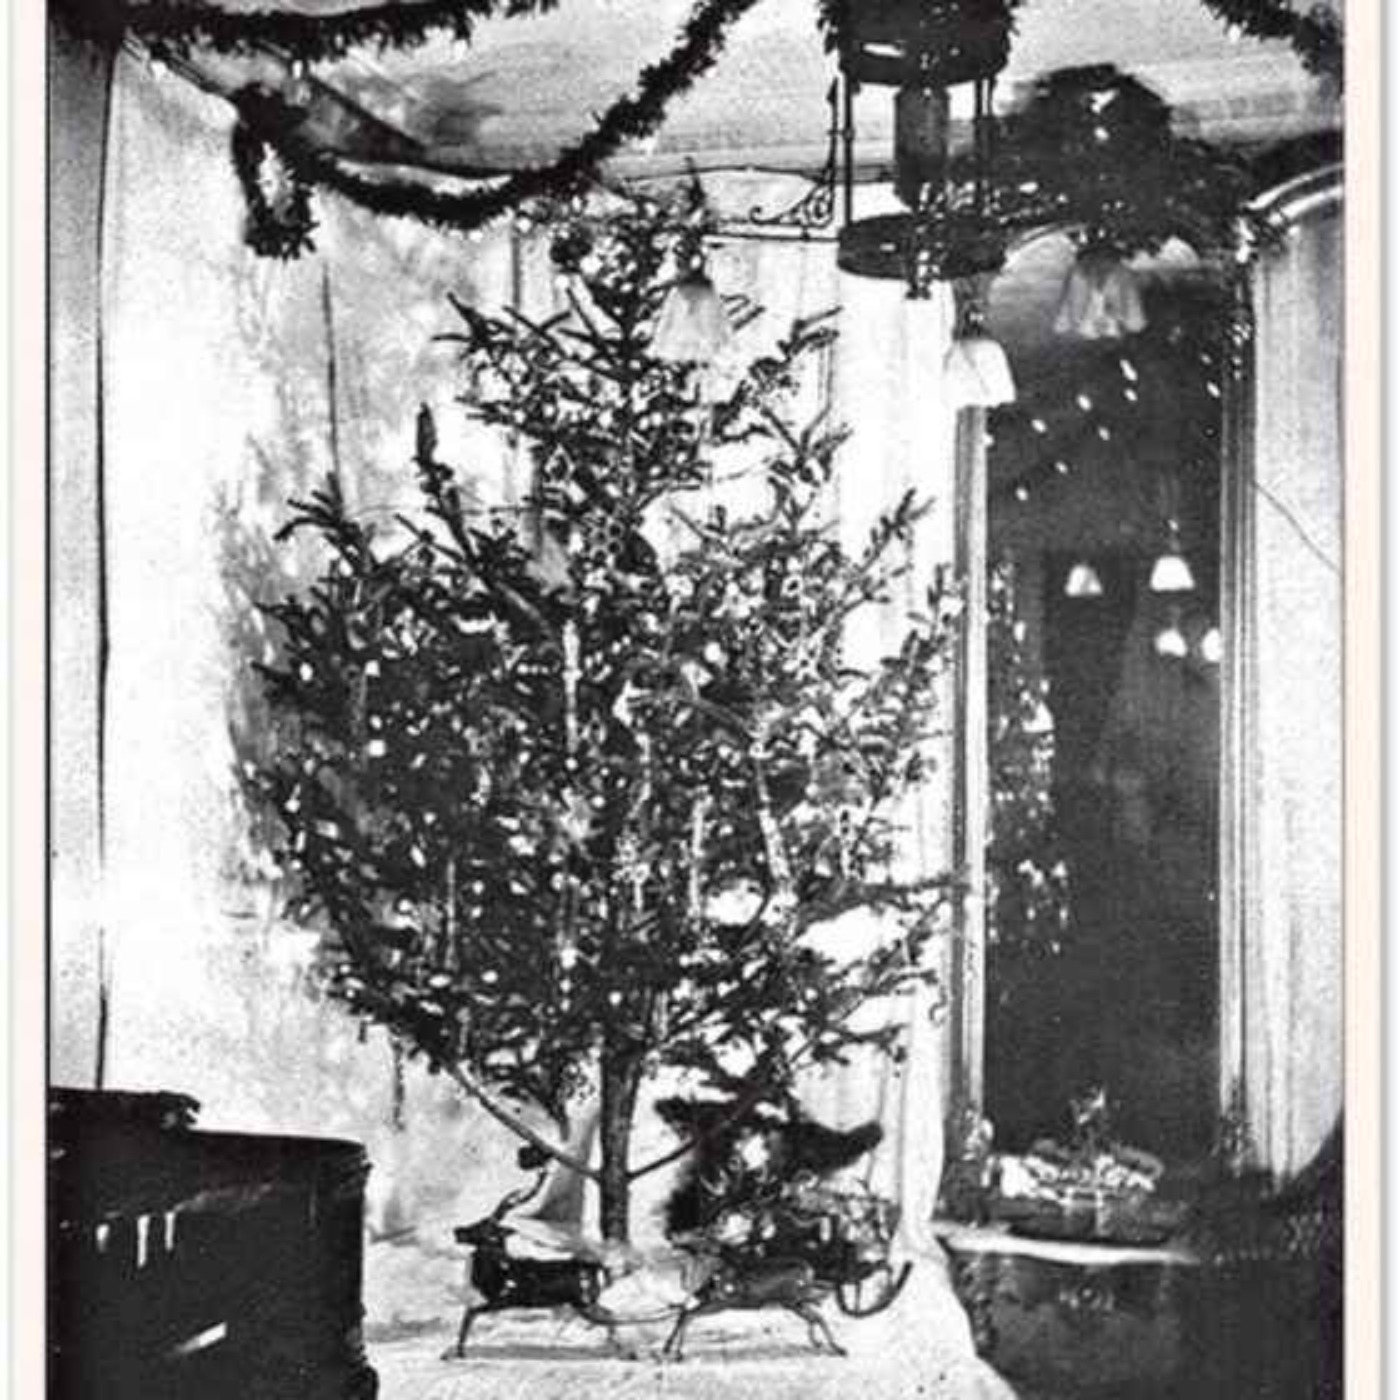 The First Electric Christmas Tree Lights